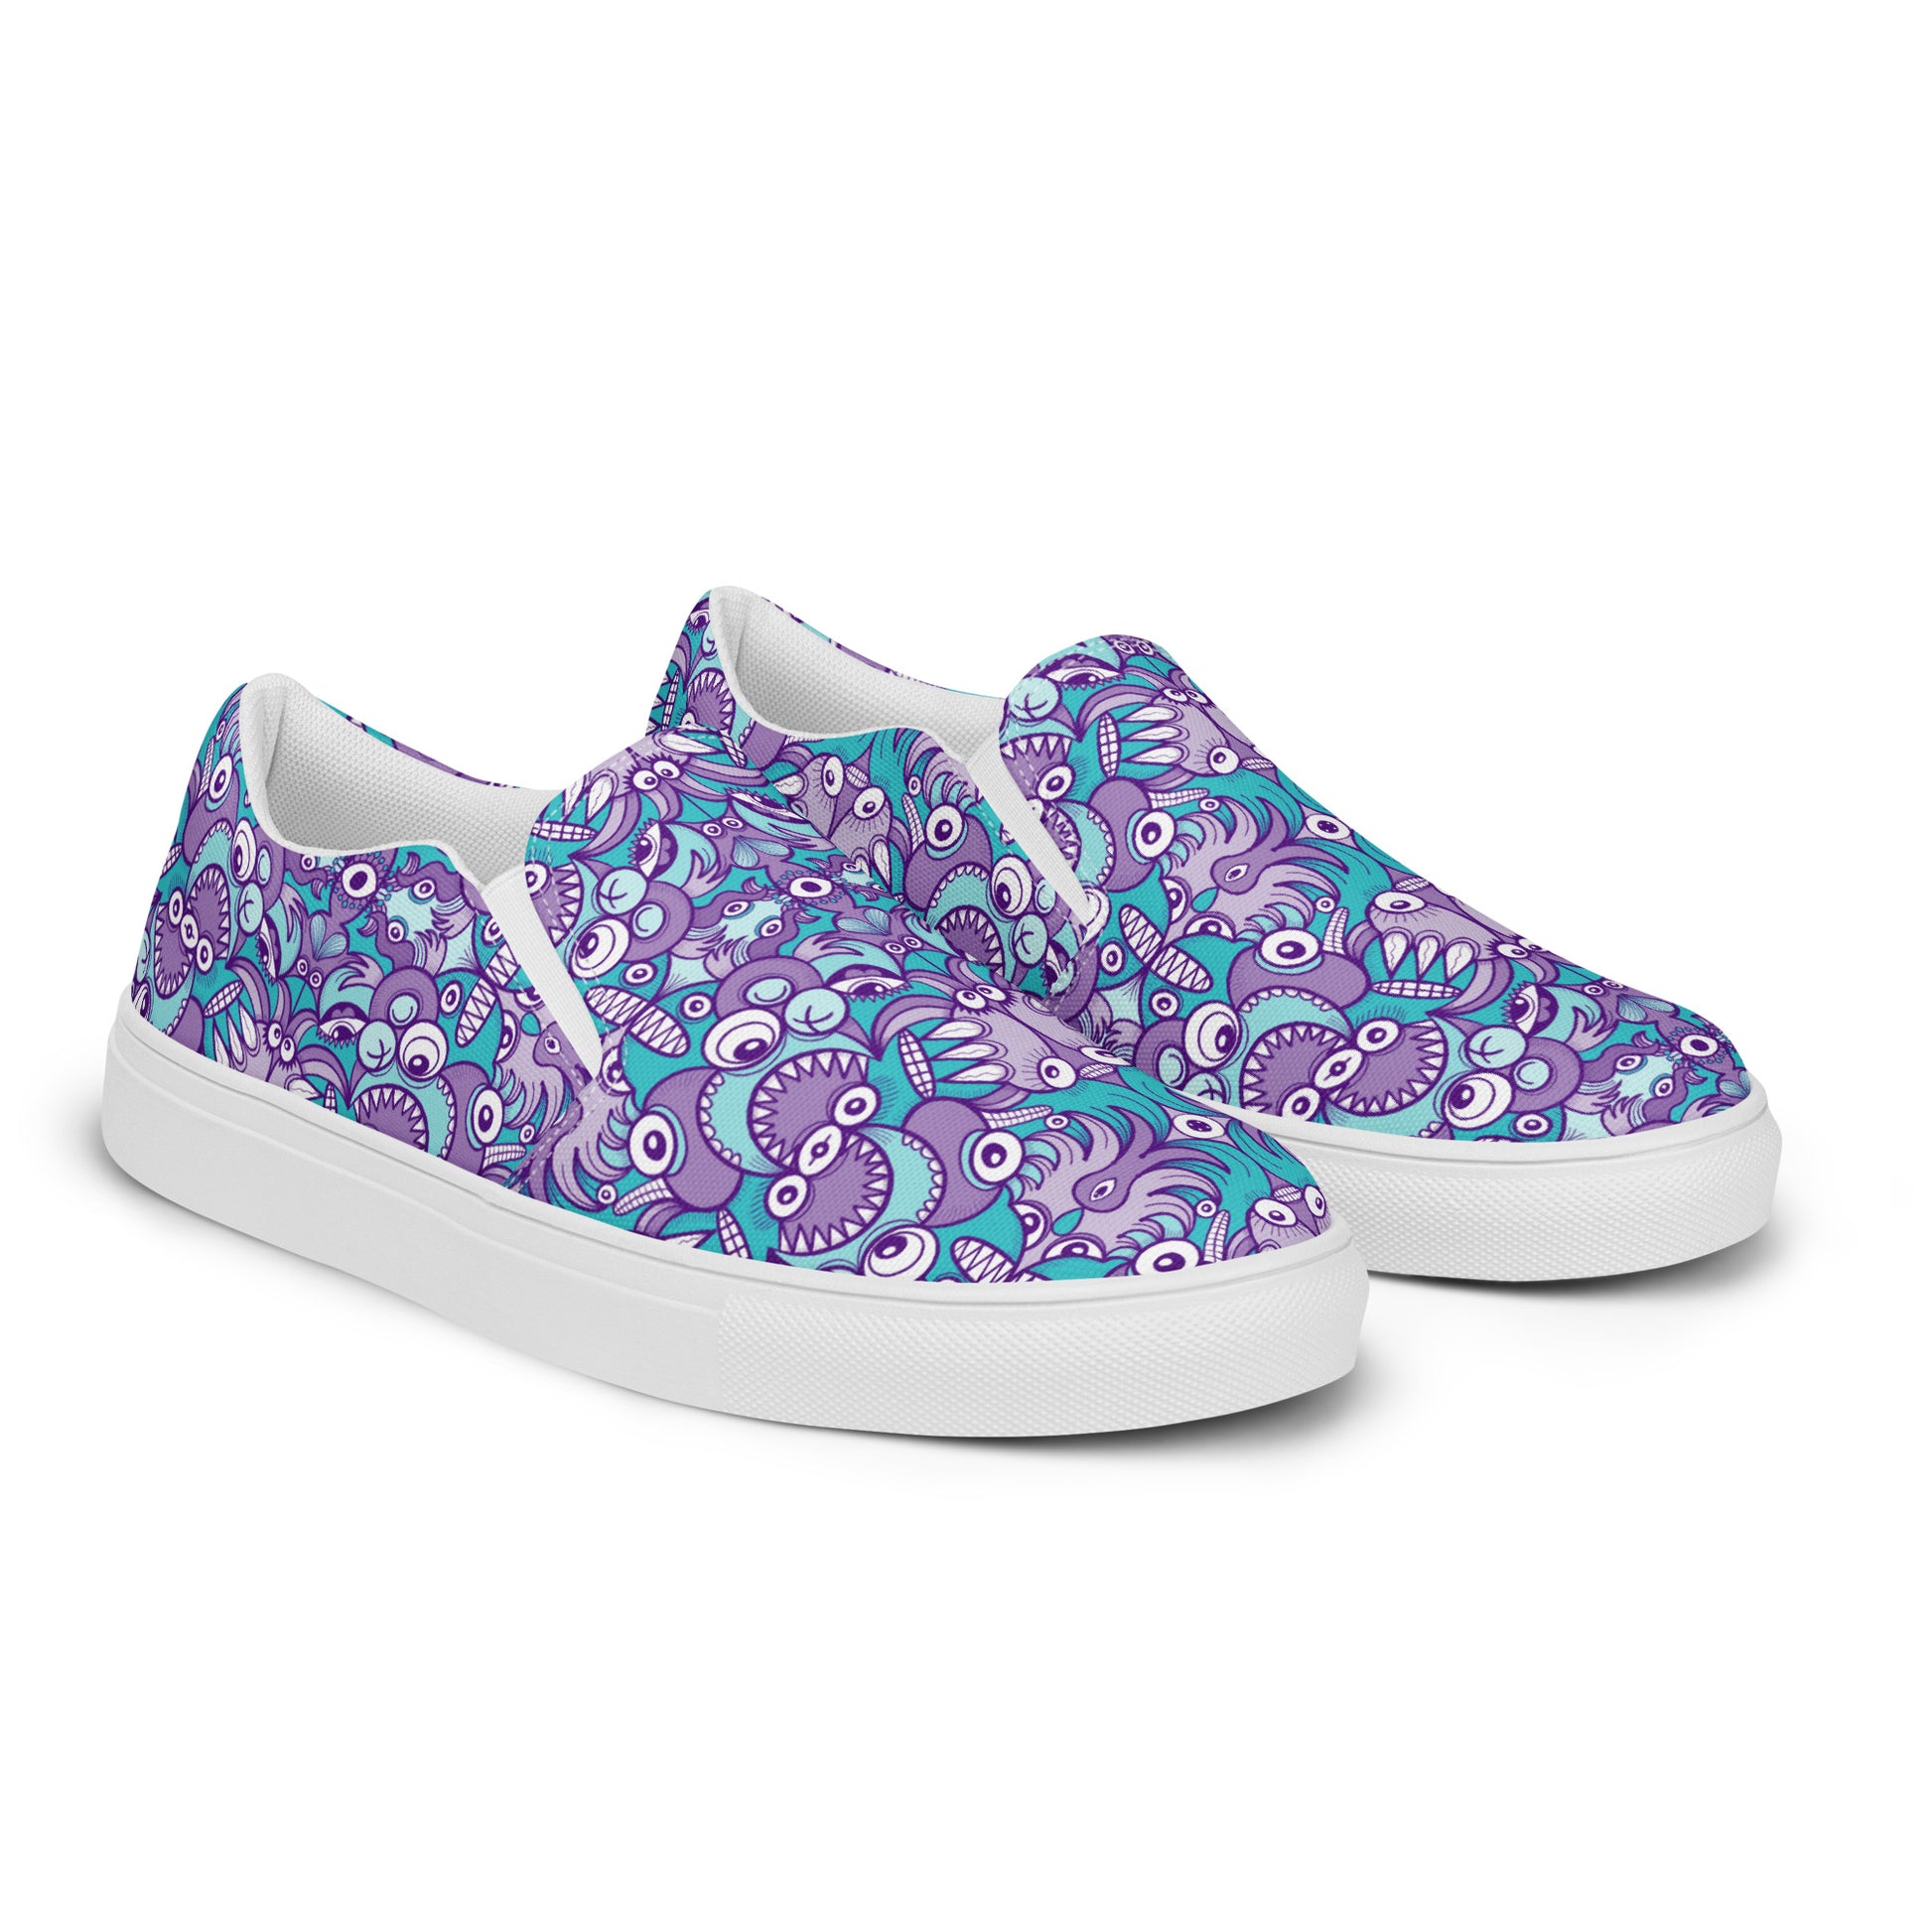 Planet 5: Aquatic Creatures from the Doodles of the Galaxy - Women’s slip-on canvas shoes. Overview